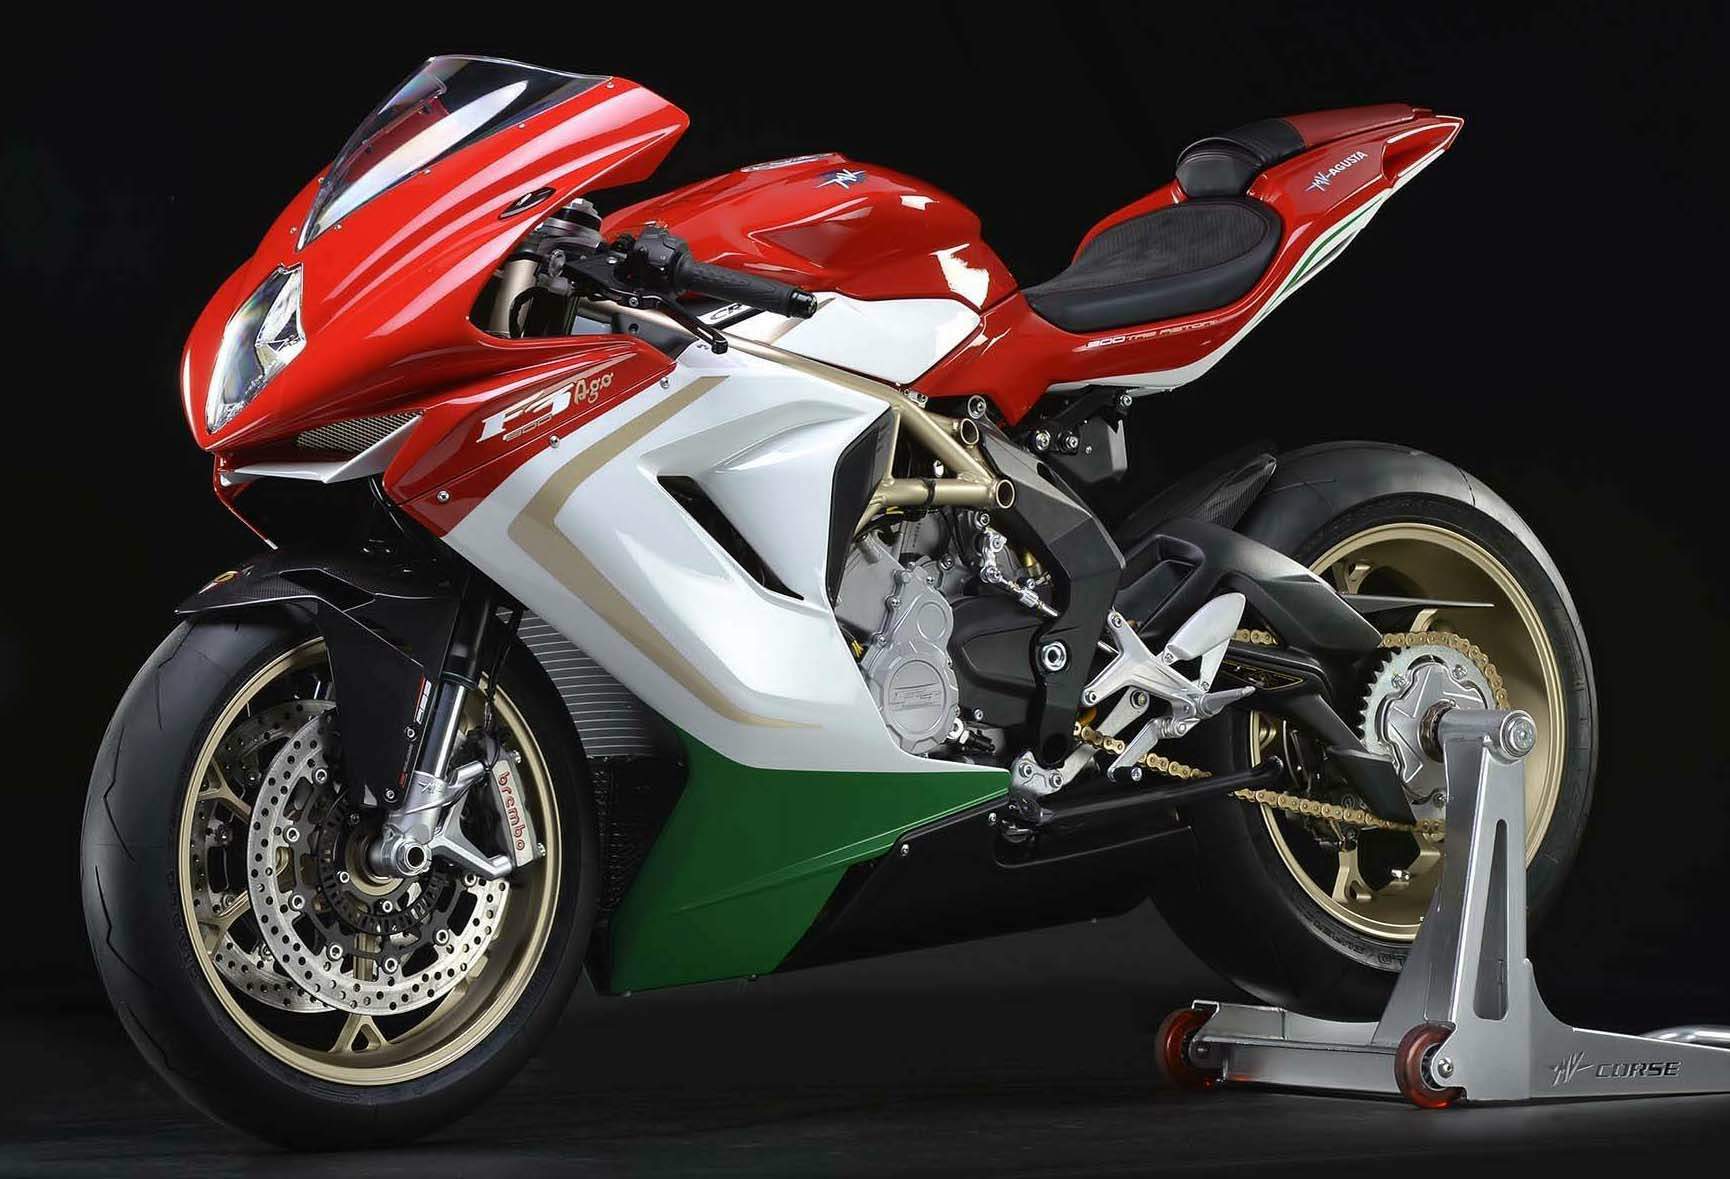 Seeing red: MV Agusta F3 800 Rosso unveiled